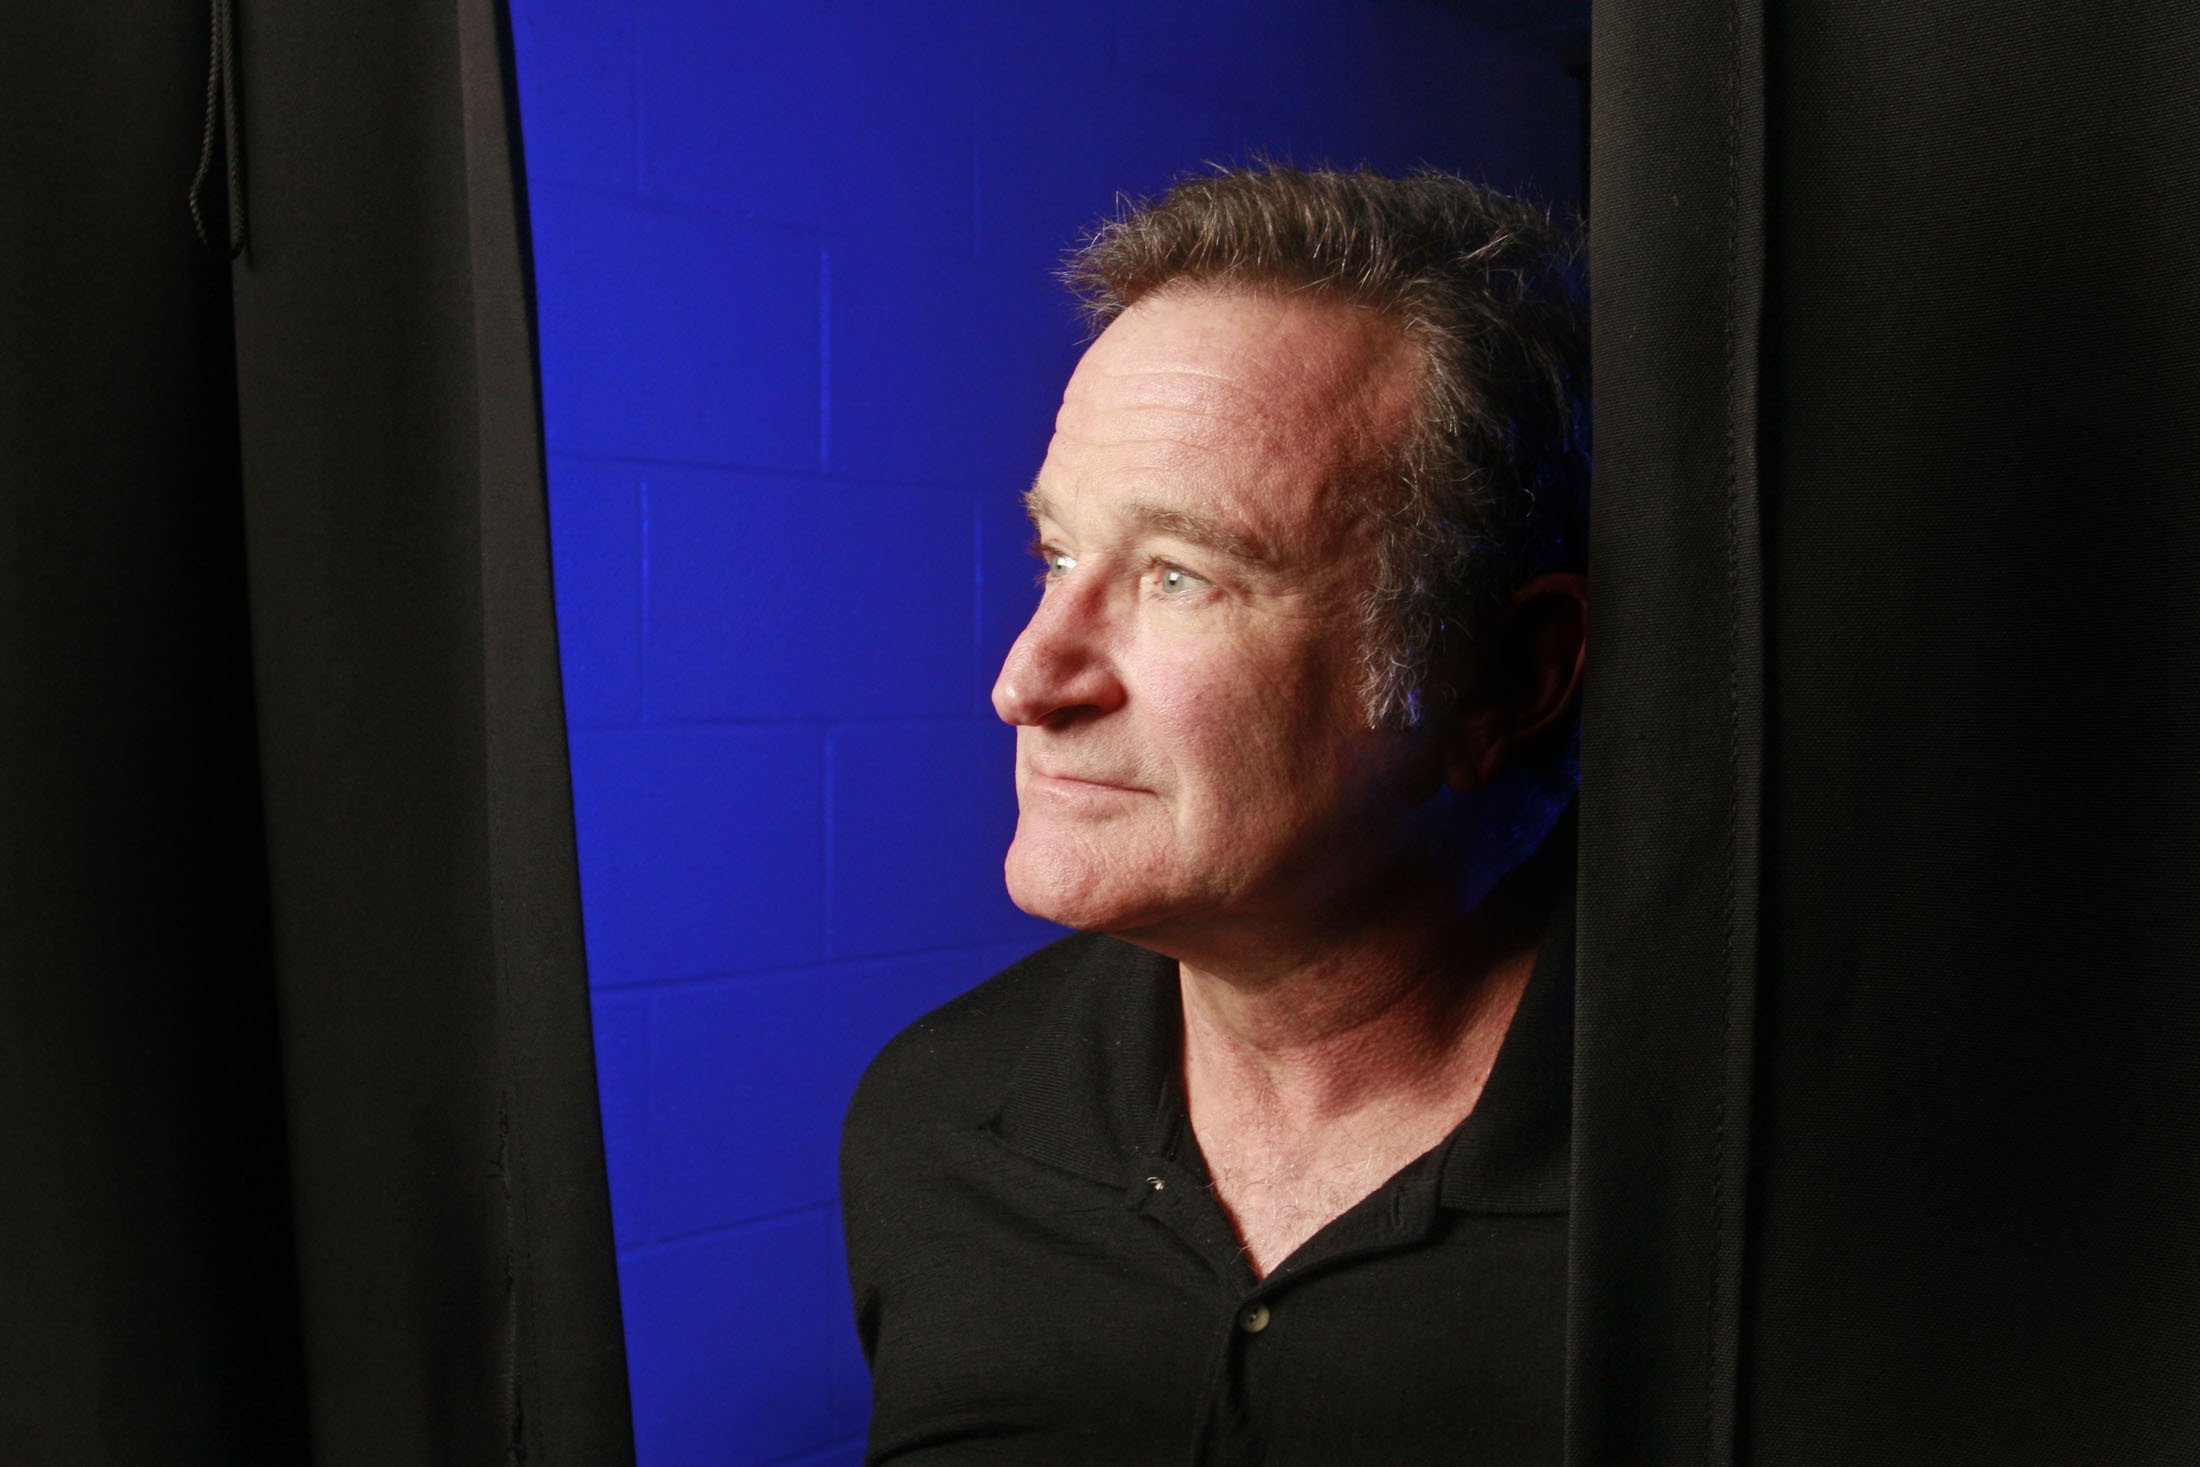 Robin Williams before his performance at the Ted Constant Convocation Center in Norfolk, Va., on Oct. 28, 2009 (Jay Paul—The New York Times/Redux)